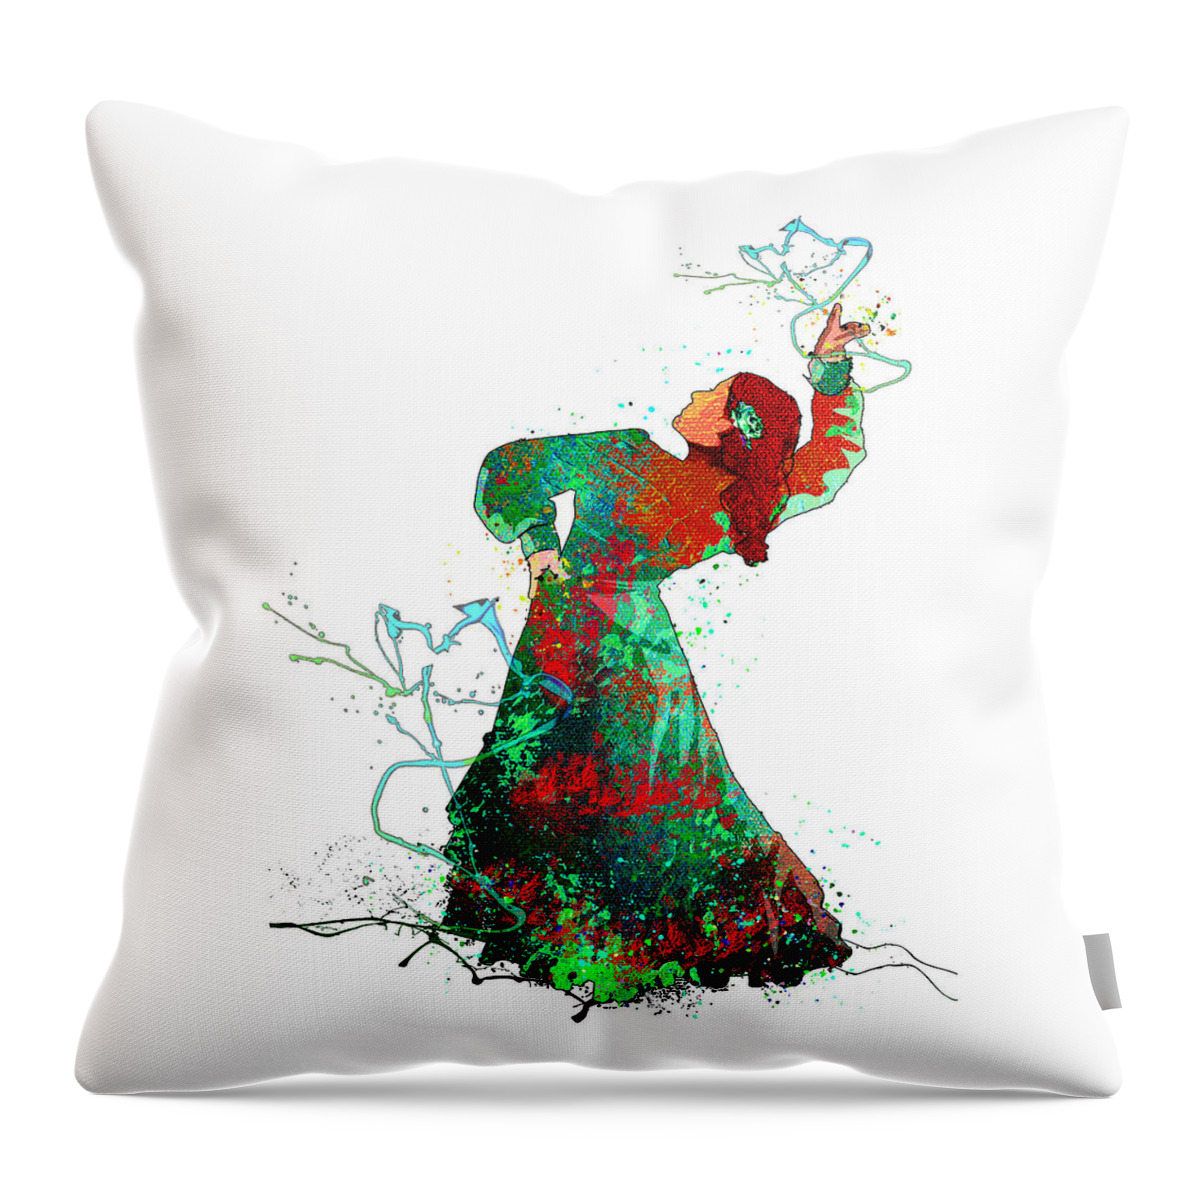 Dance Throw Pillow featuring the mixed media Flamenco Passion 03 by Miki De Goodaboom